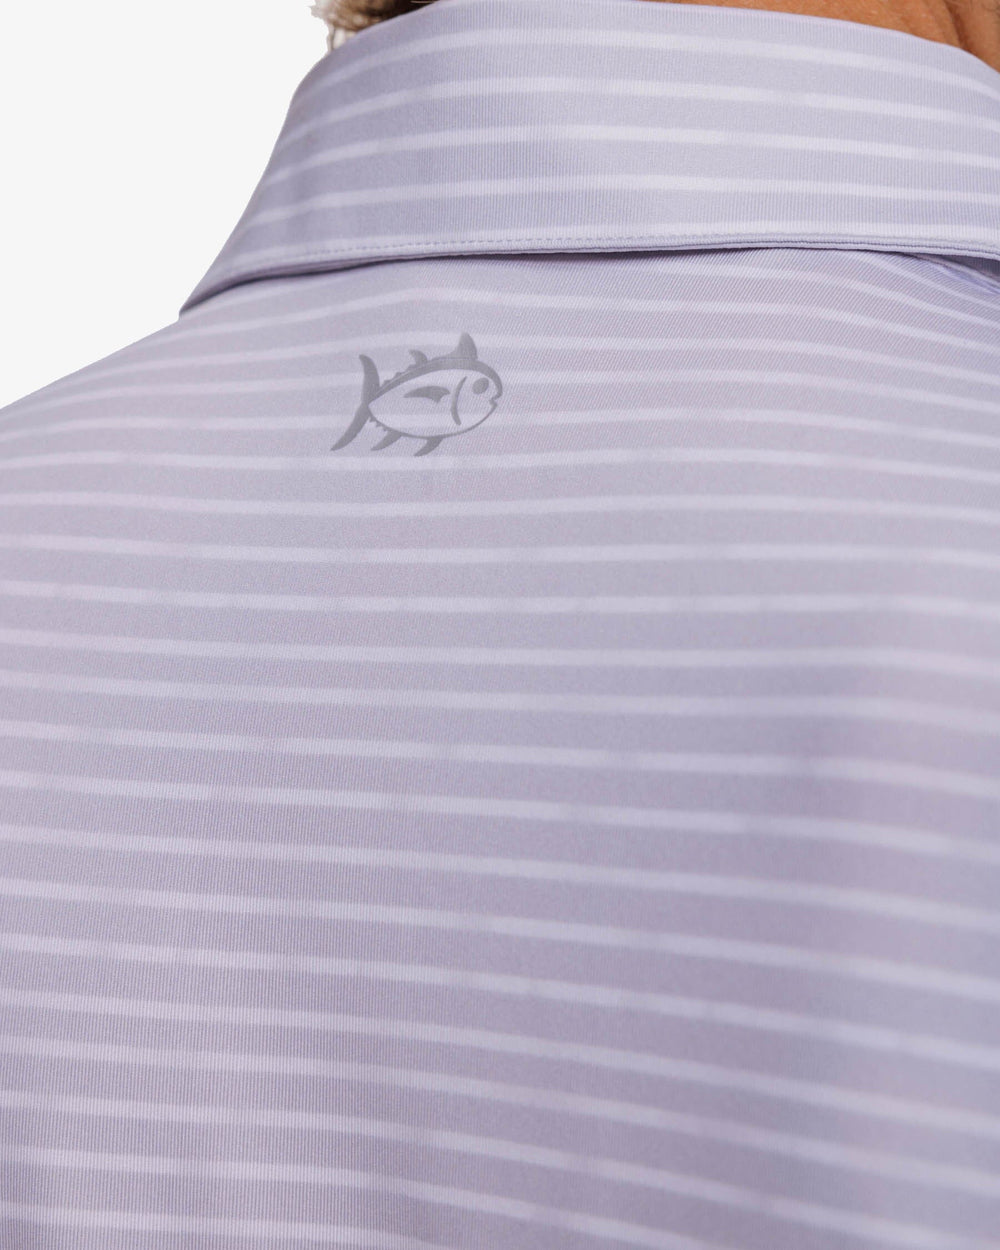 The detail view of the Southern Tide Driver Wymberly Stripe Performance Polo Shirt by Southern Tide - Slate Grey